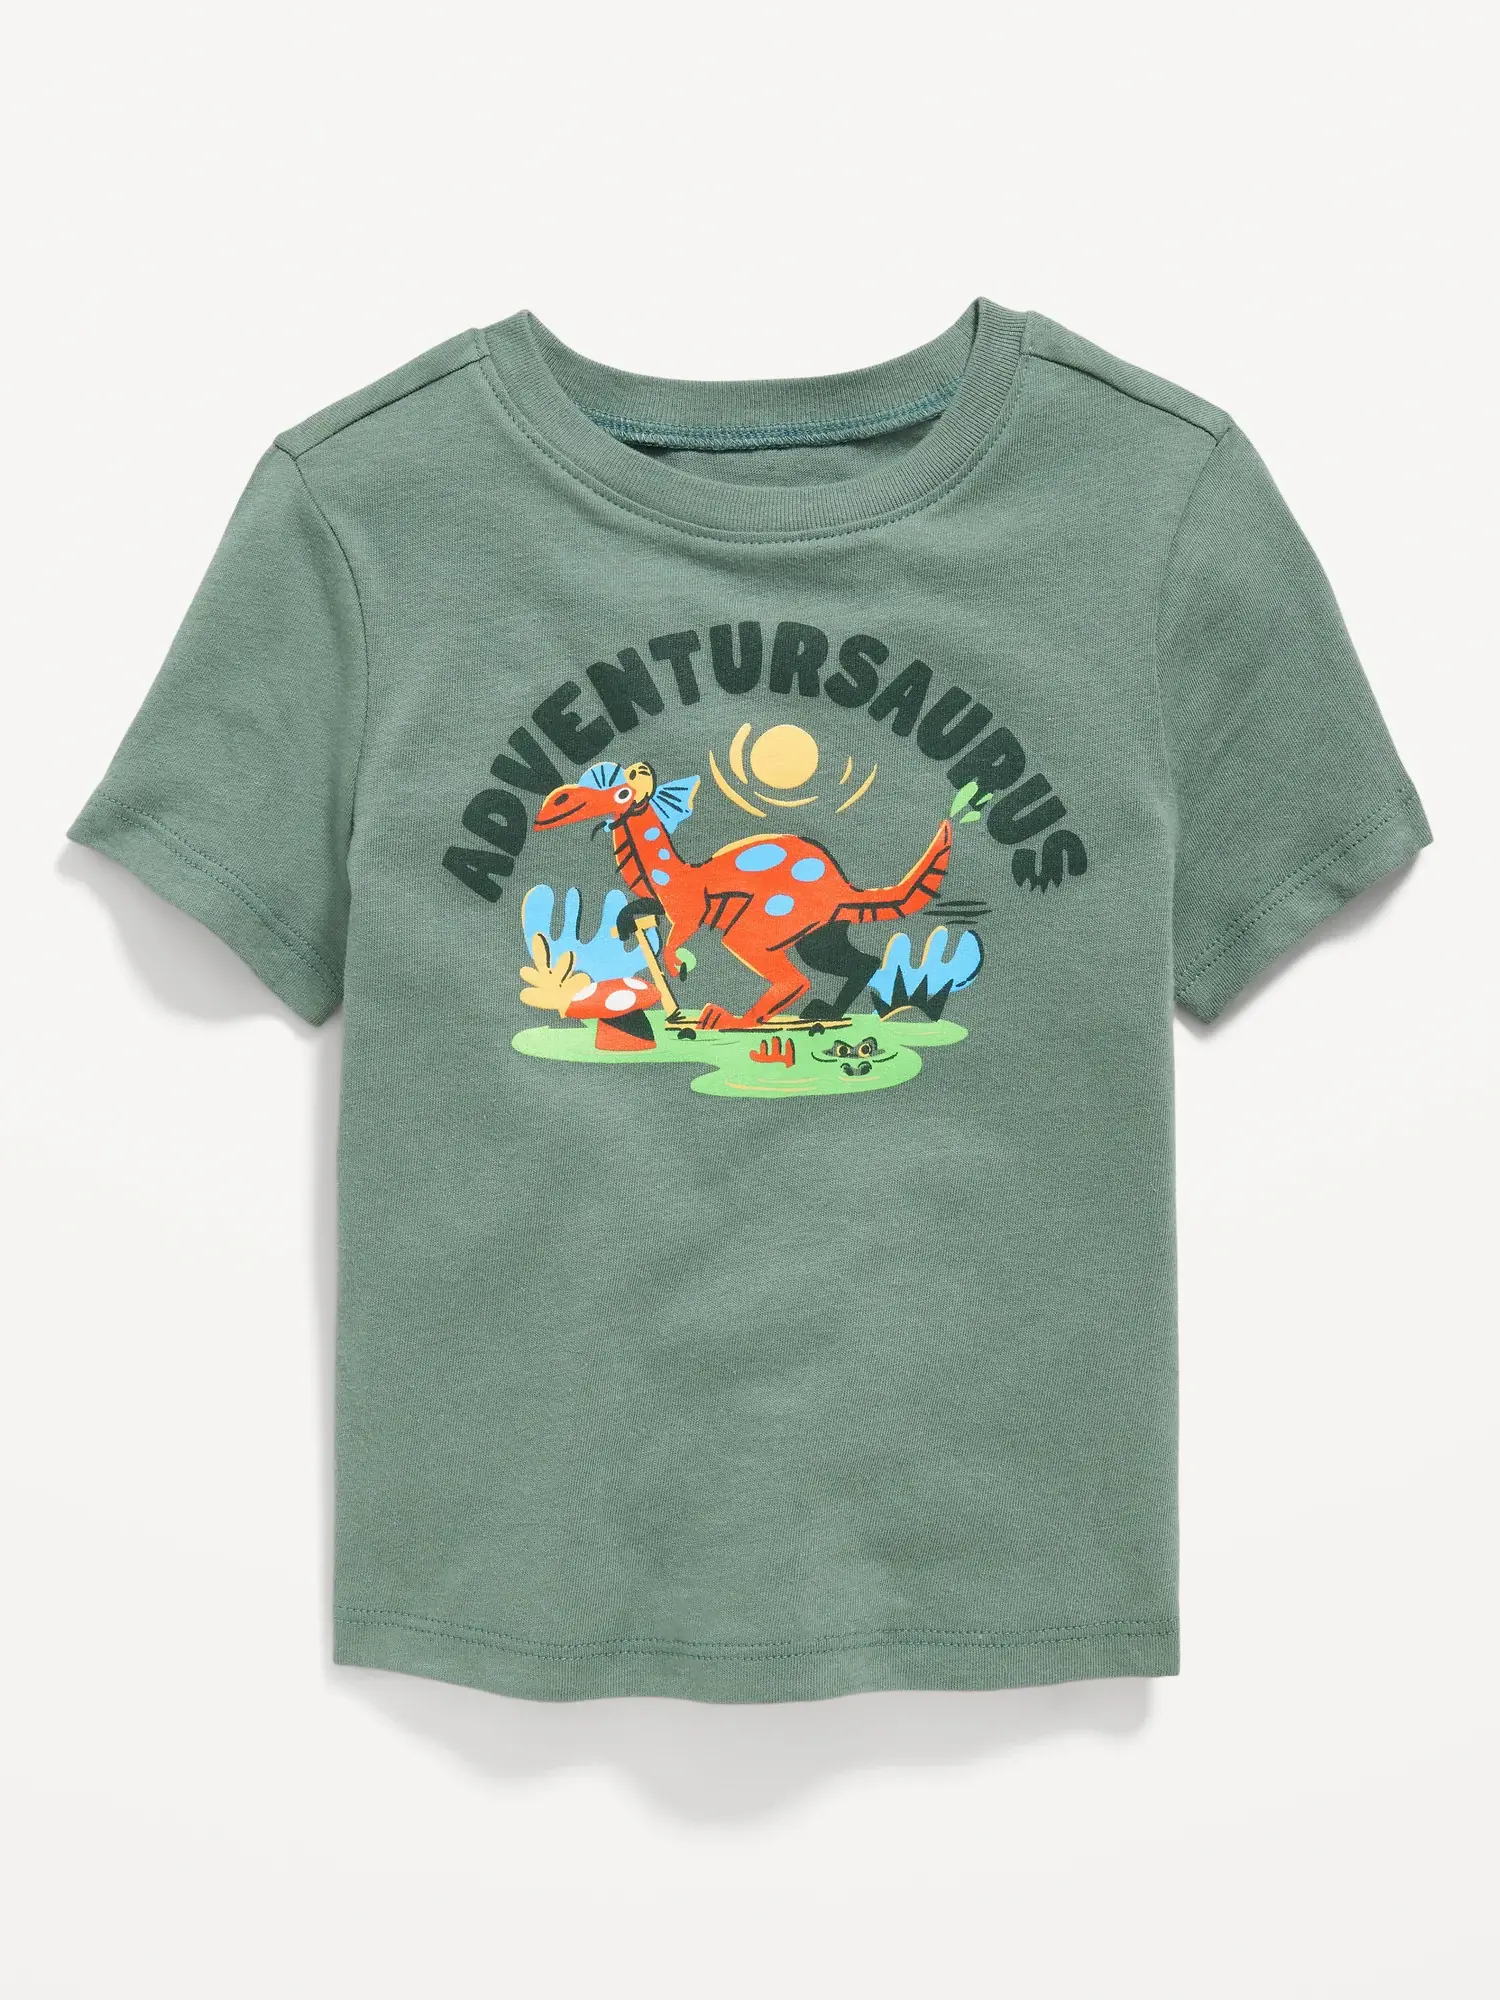 Old Navy Unisex Short-Sleeve Graphic T-Shirt for Toddler green. 1